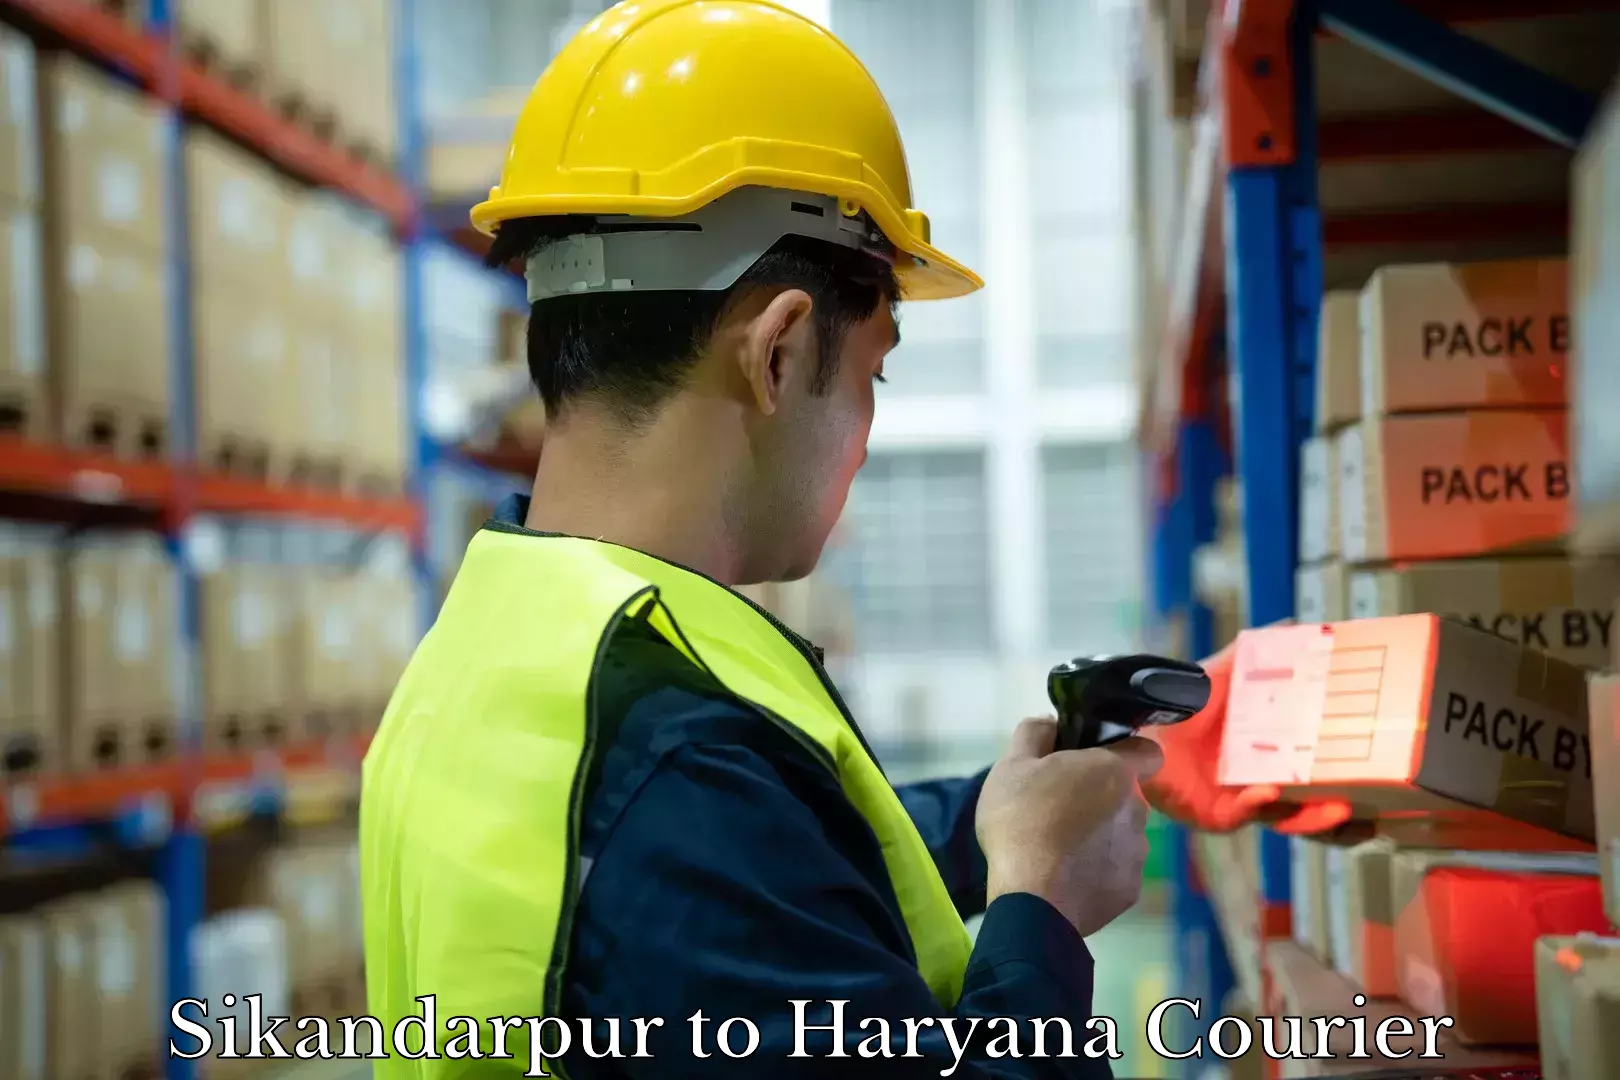 Hassle-free luggage shipping in Sikandarpur to NCR Haryana